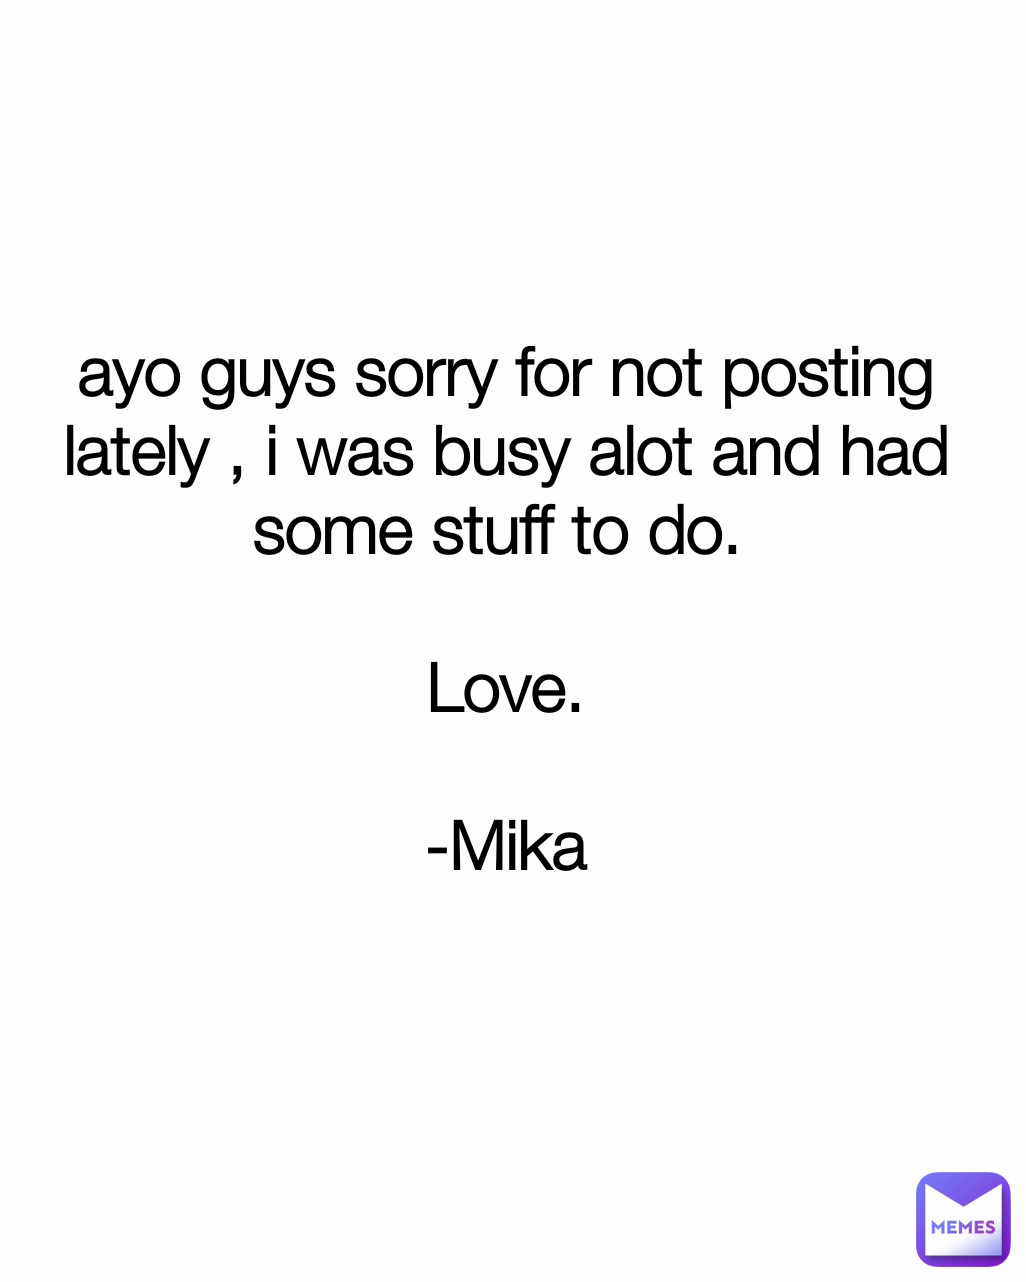 ayo guys sorry for not posting lately , i was busy alot and had some stuff to do. 

Love.

-Mika